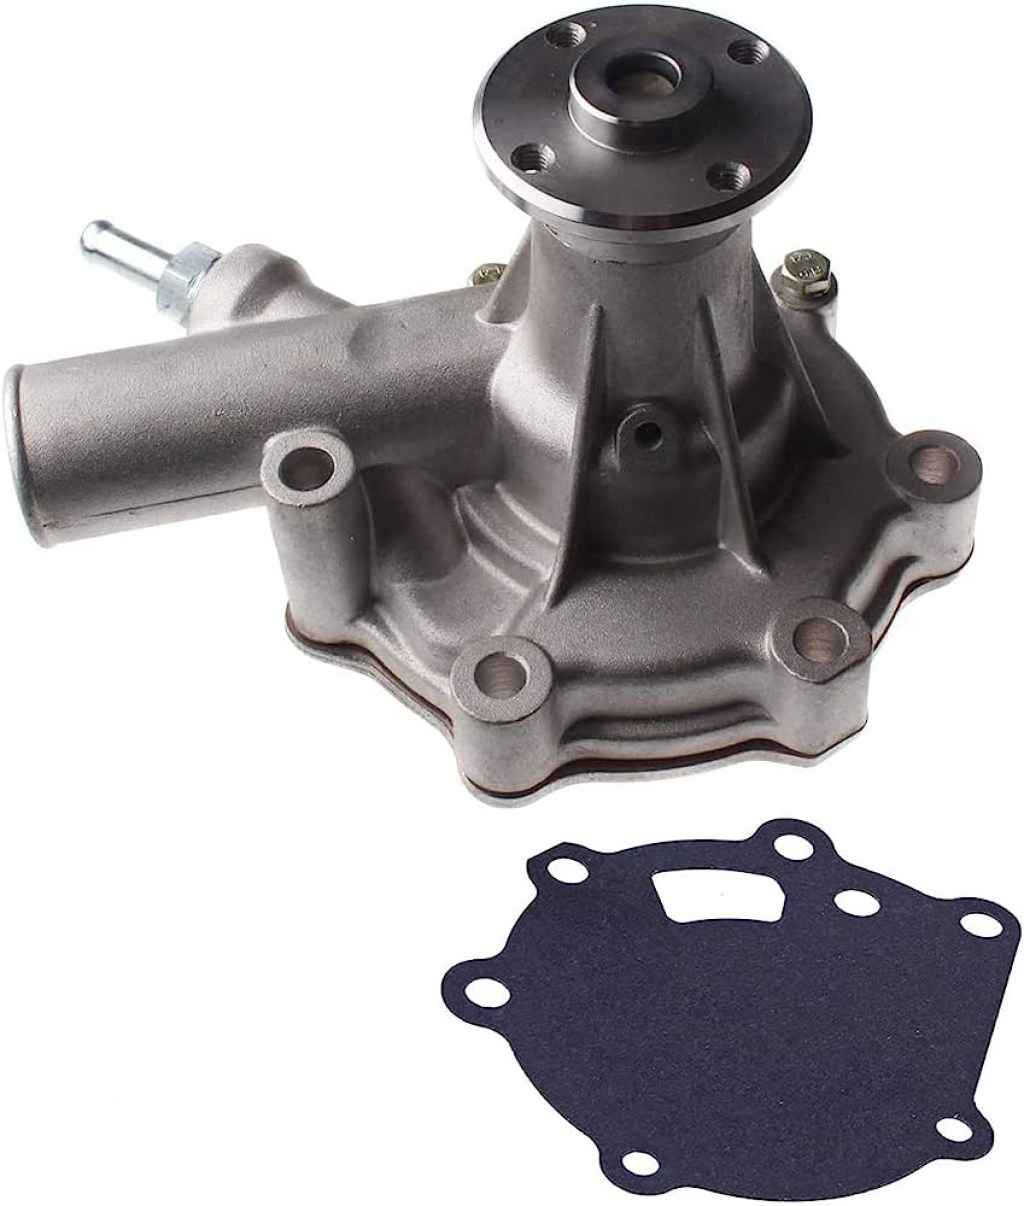 1986 mitsubishi s670d satoh owners manual - FridayParts Water Pump MM C Compatible for Case IH Tractor          Replacement